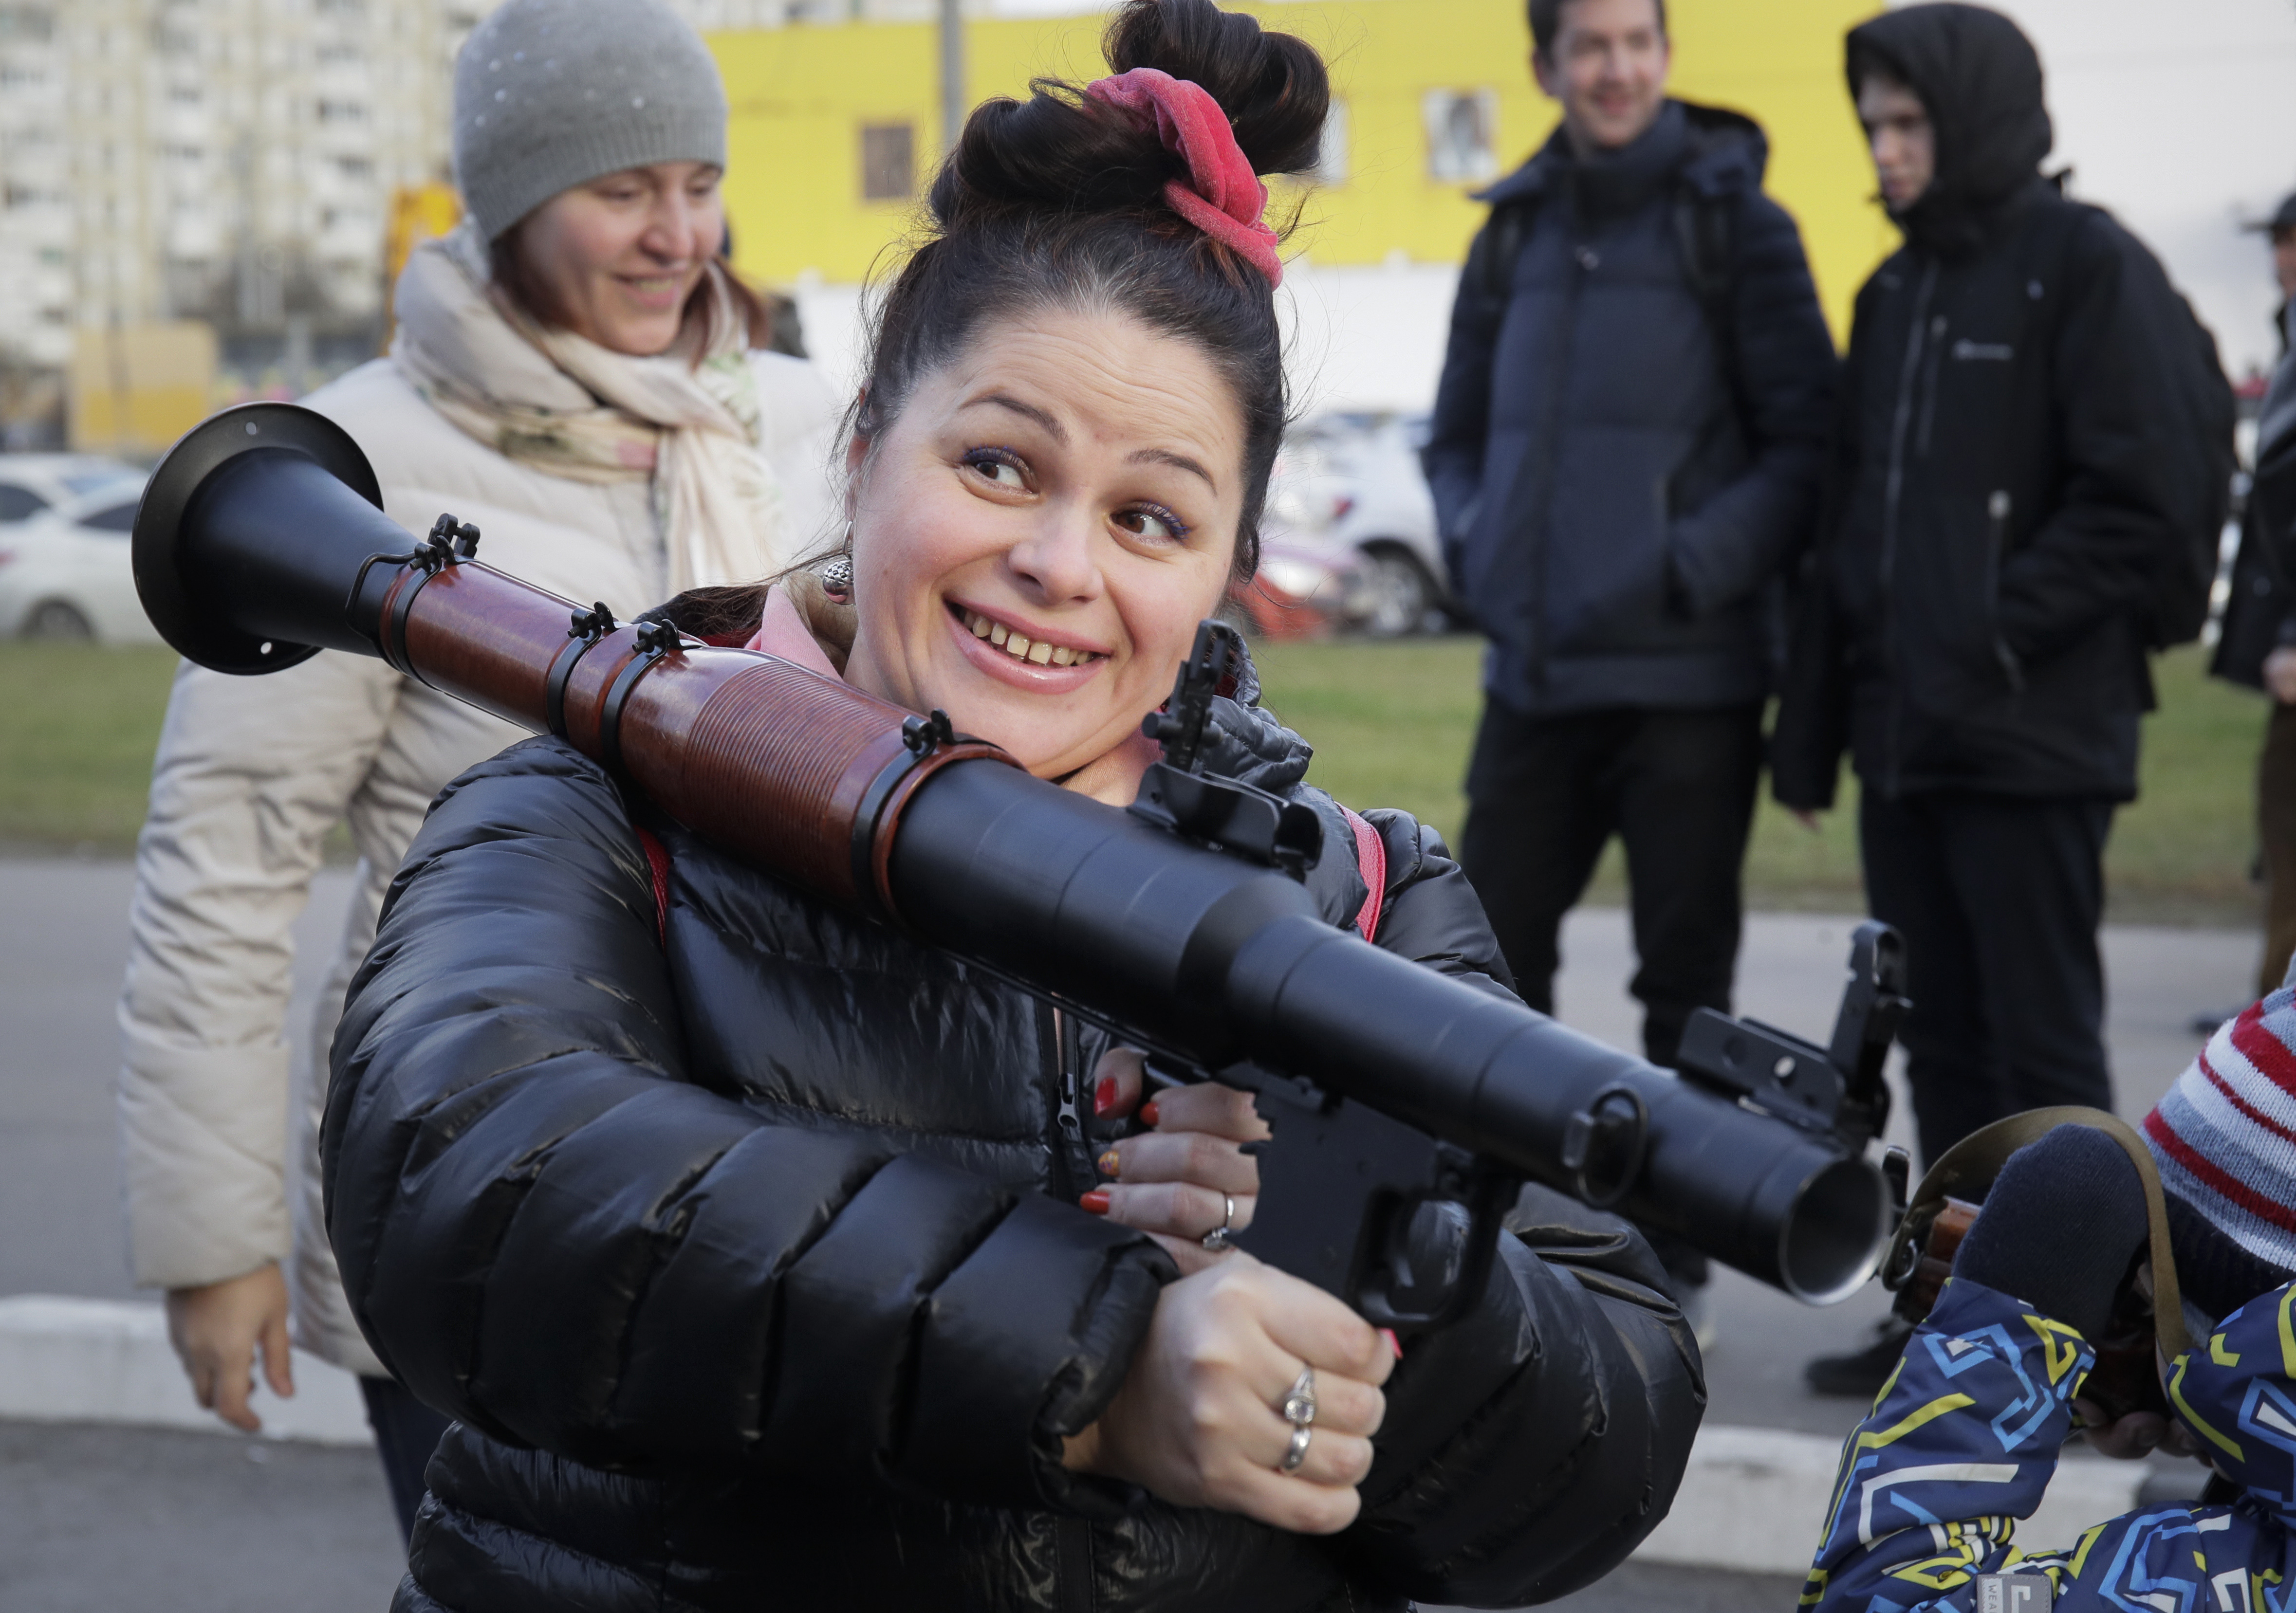 A woman poses with a grenade launcher at a weapons exhibition during festivities marking Marines Day in St.Petersburg, Russia, Saturday, Nov. 24, 2018. (AP Photo/Dmitri Lovetsky)